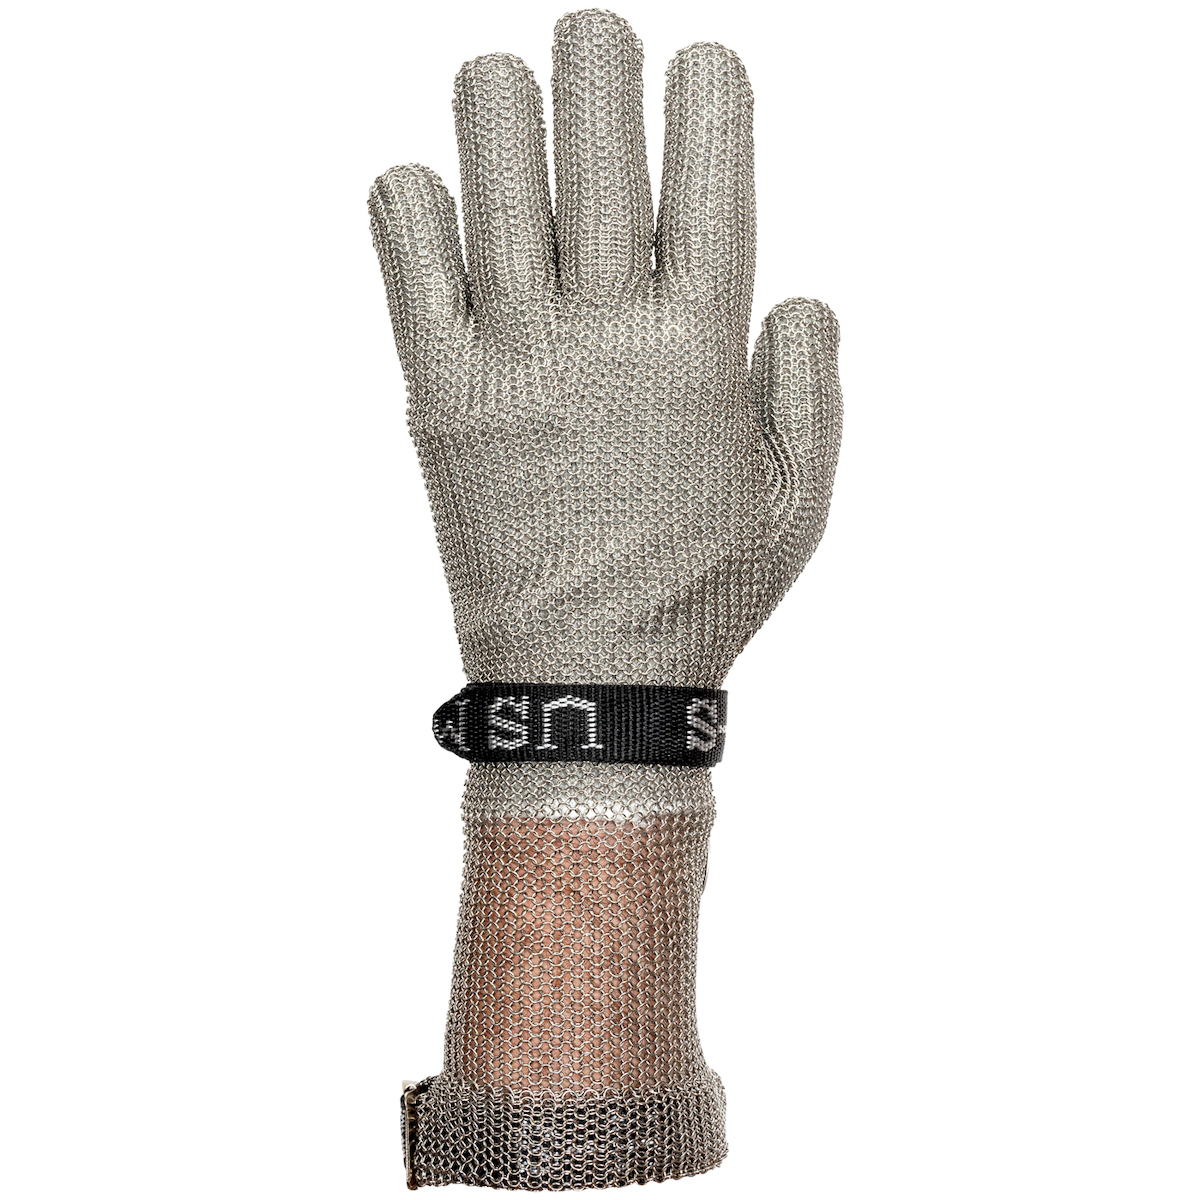 USM-1305 US Mesh® Stainless Steel Mesh Glove with Adjustable Snap-Back Strap Closure - Forearm Length